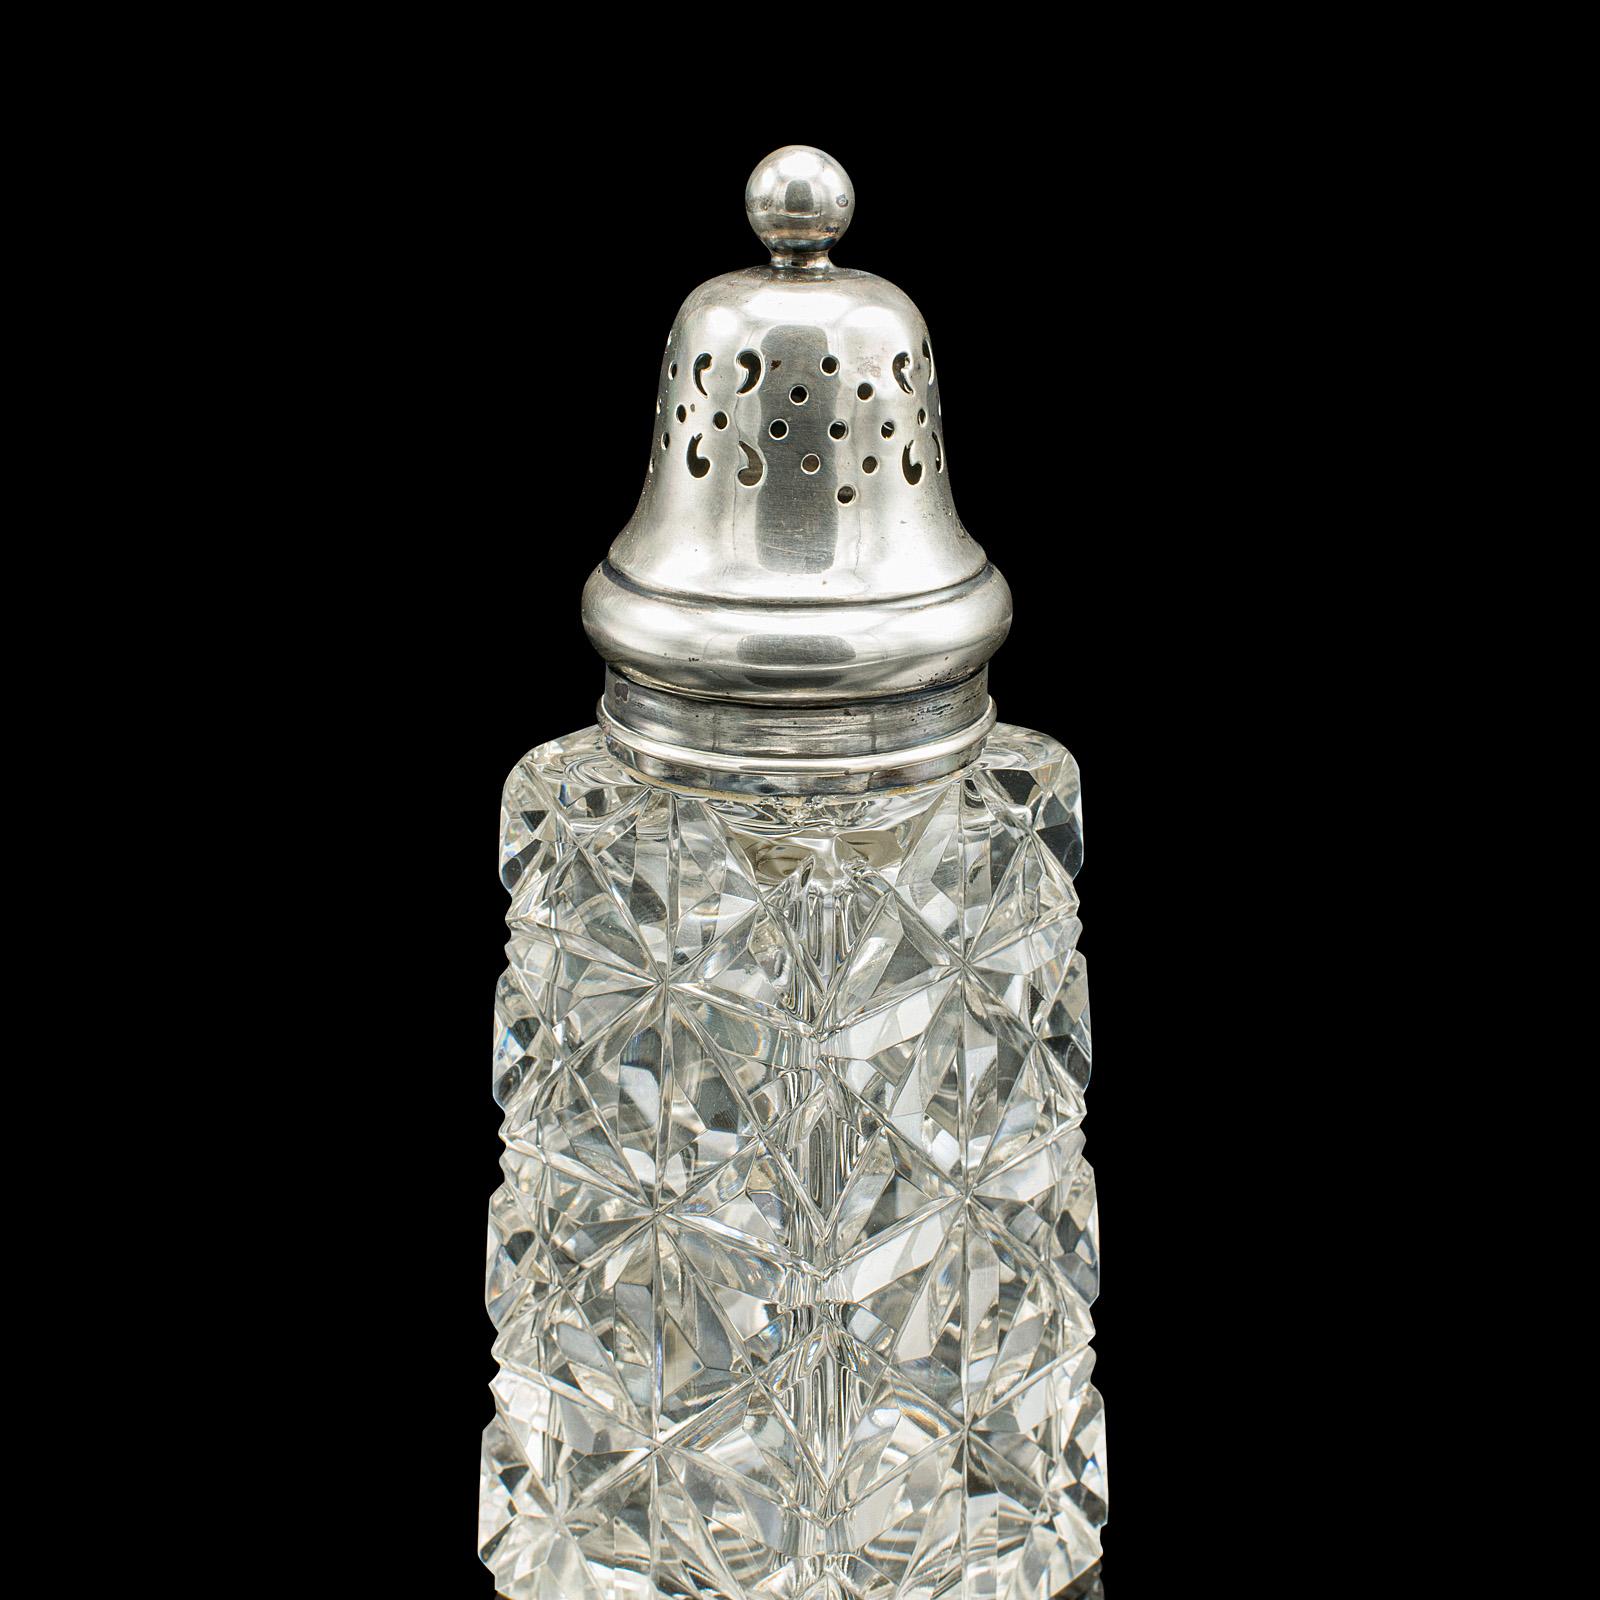 20th Century Vintage Sugar Shaker, English, Glass, Sterling Silver, Caster, Hallmarked 1929 For Sale